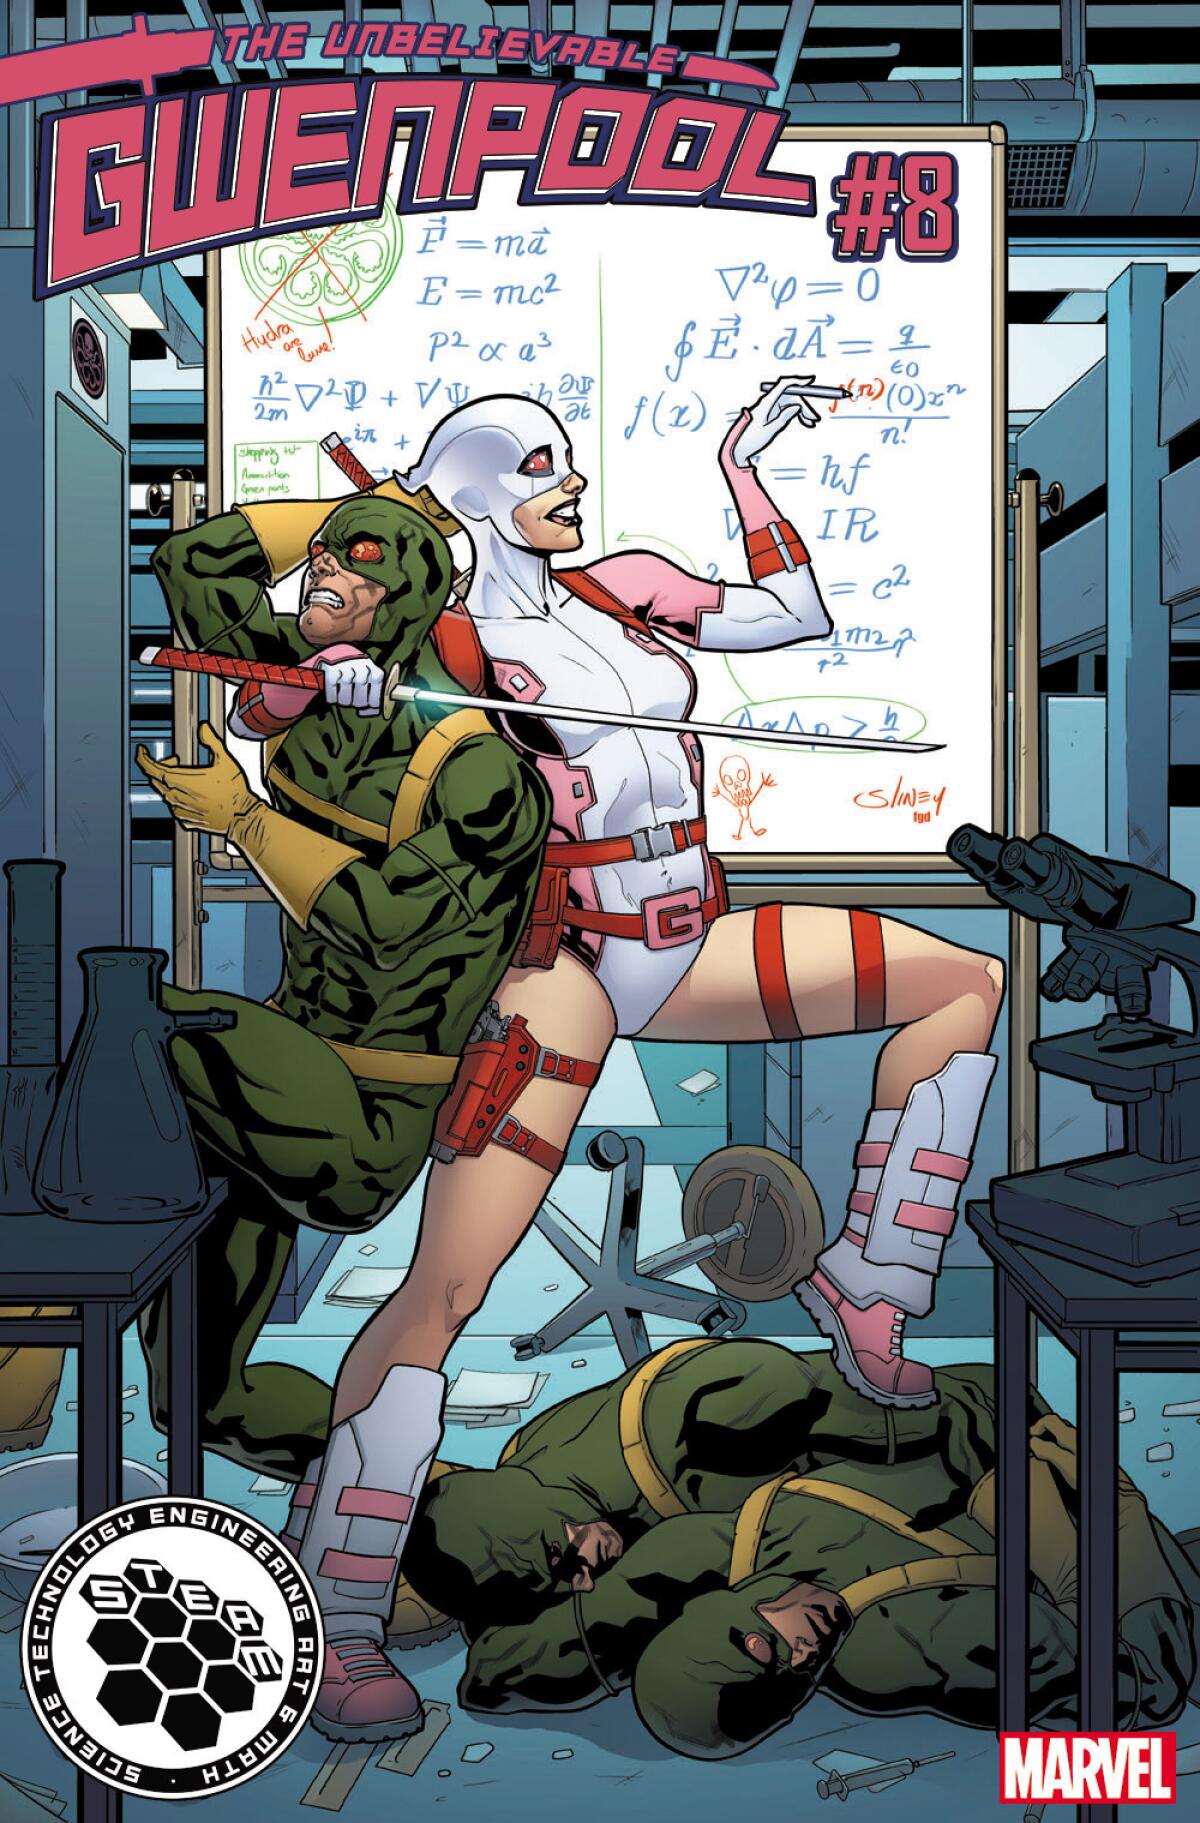 "Gwenpool" No. 8 STEAM variant cover (math) by Will Sliney. (Marvel)